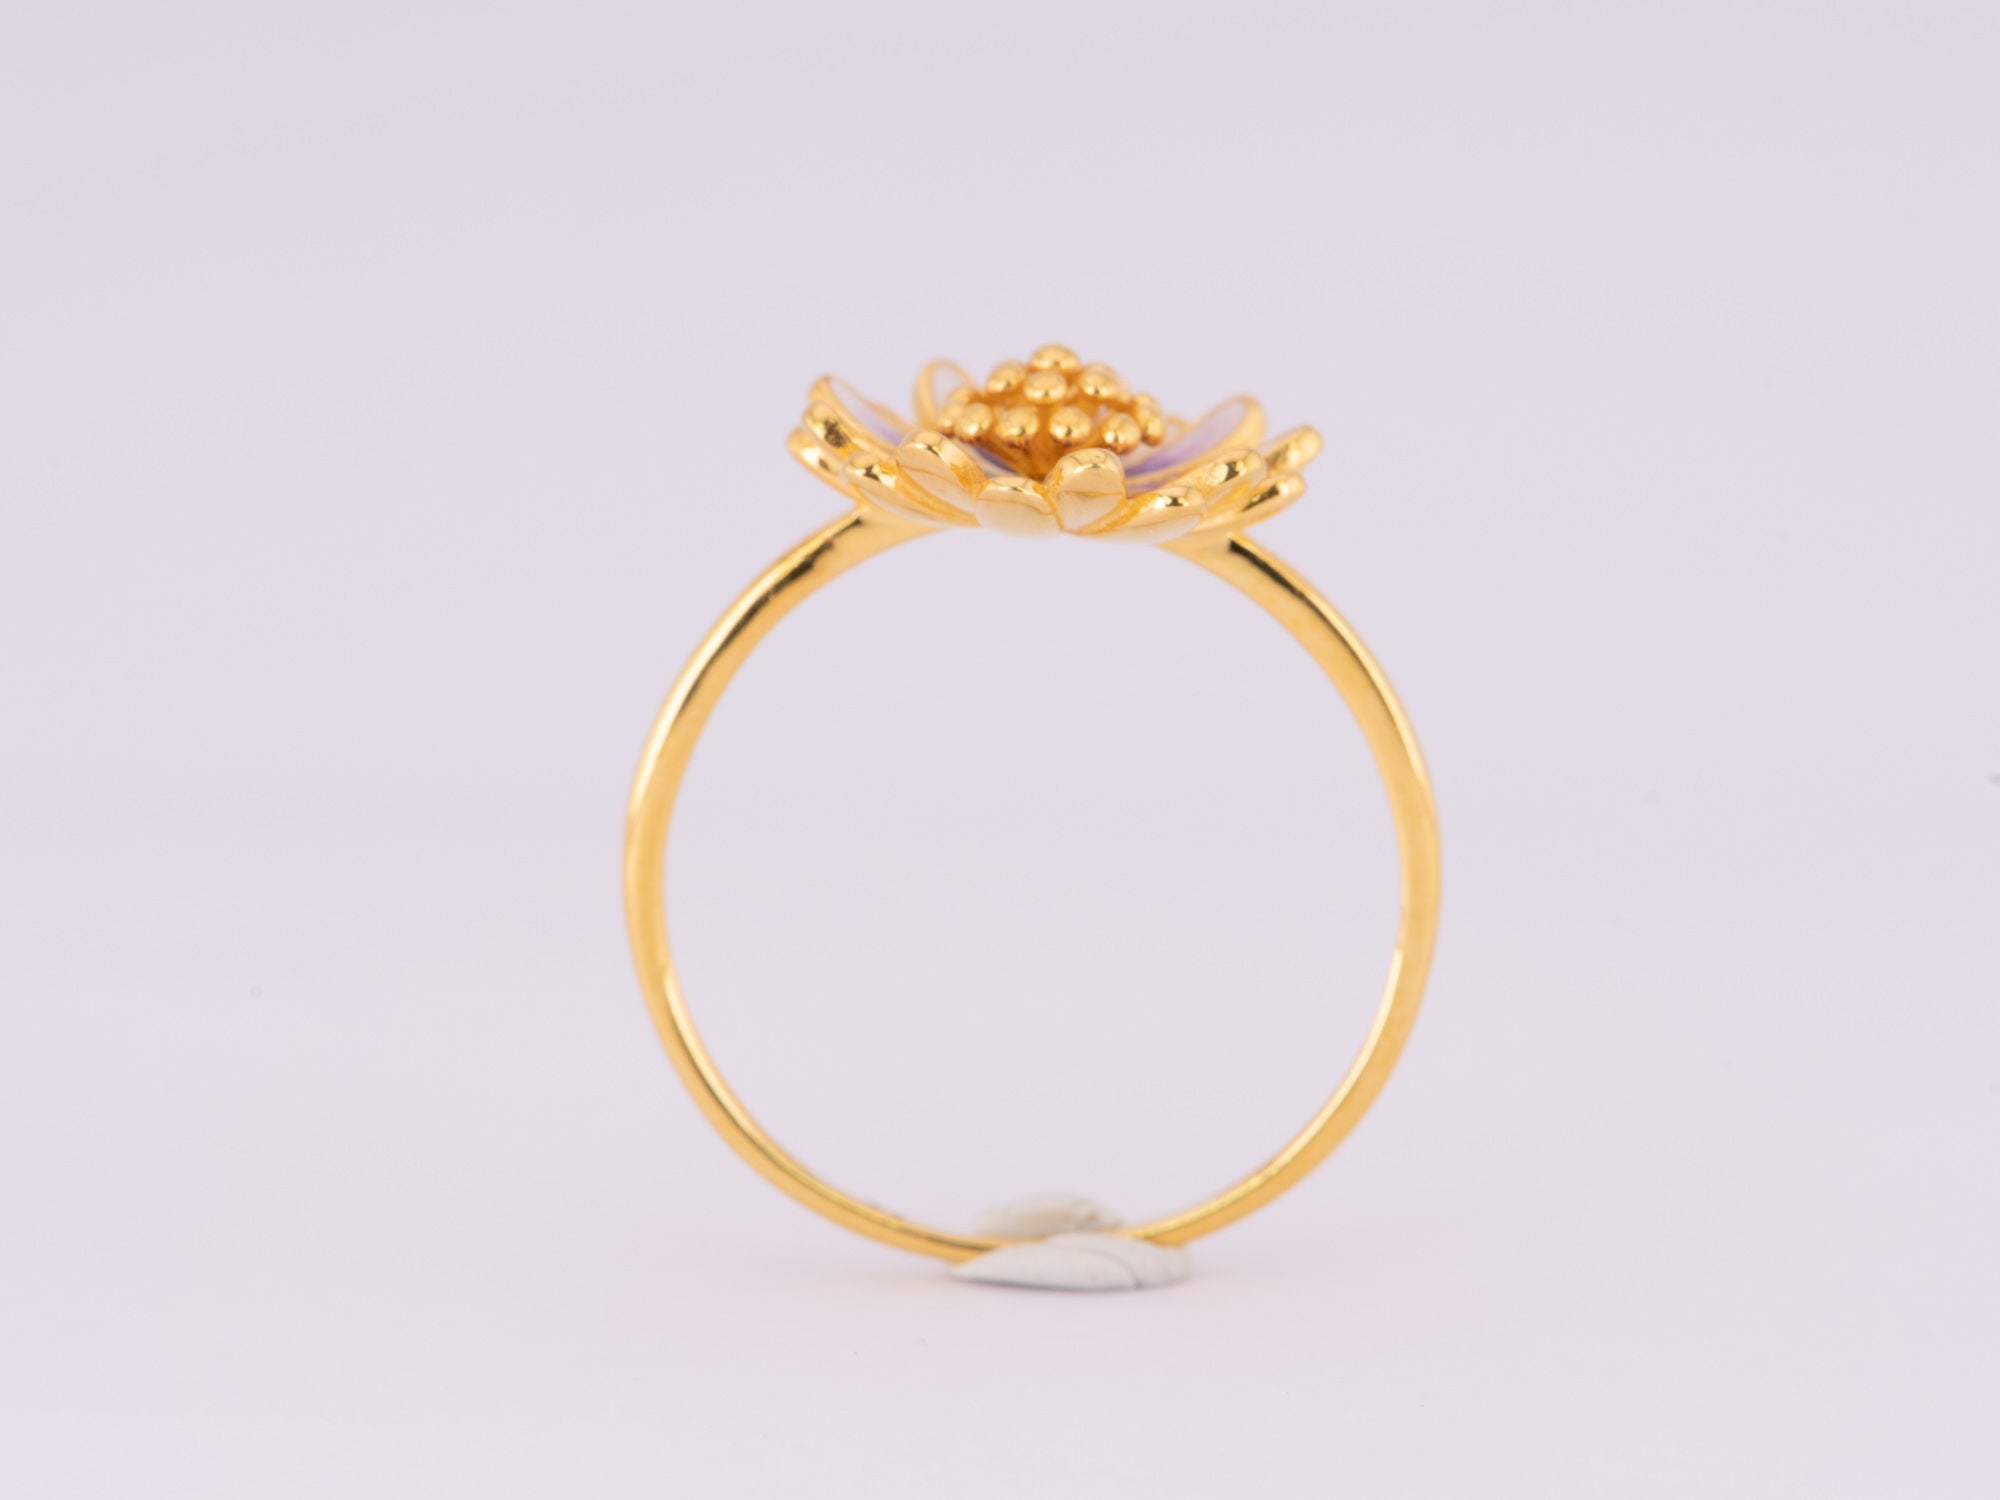 22k Fancy 2 Tone Light Weight Ring - RiLg15156 - 22k Gold Ladies Fancy Ring  designed with filigree work in combination with diamond cuts in two tone